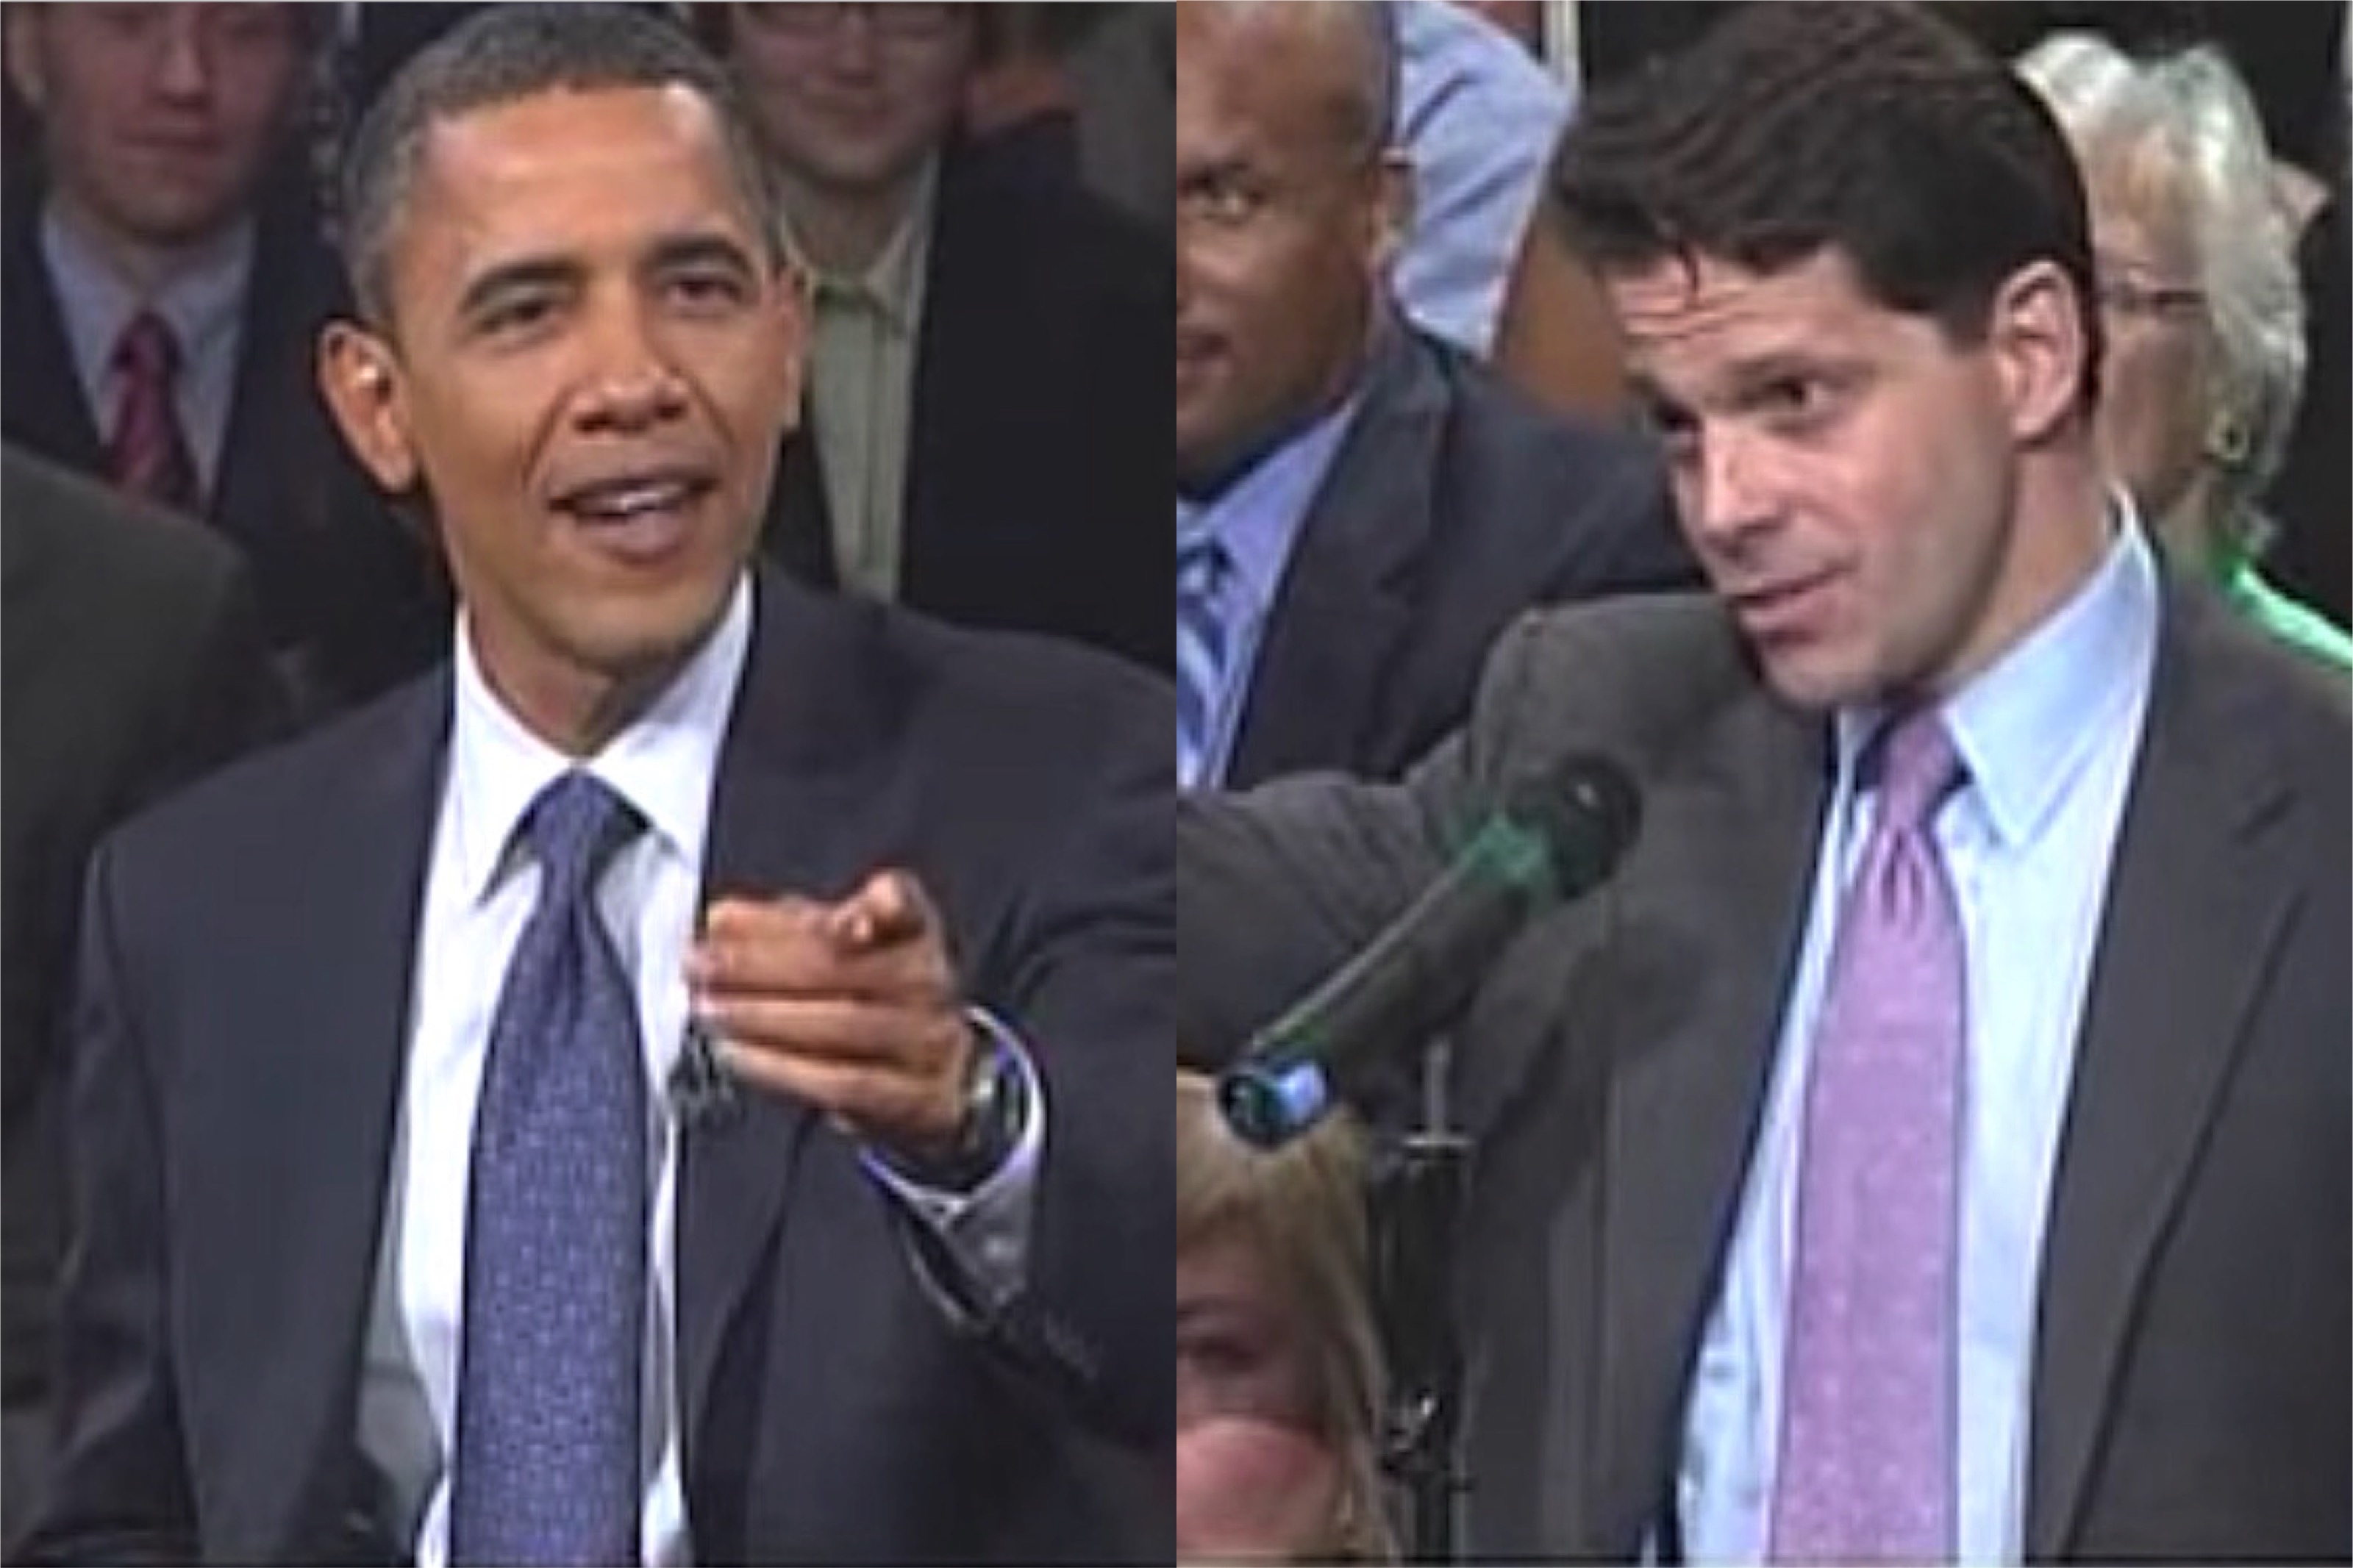 Obama and Anthony Scaramucci spar on CNBC in 2010